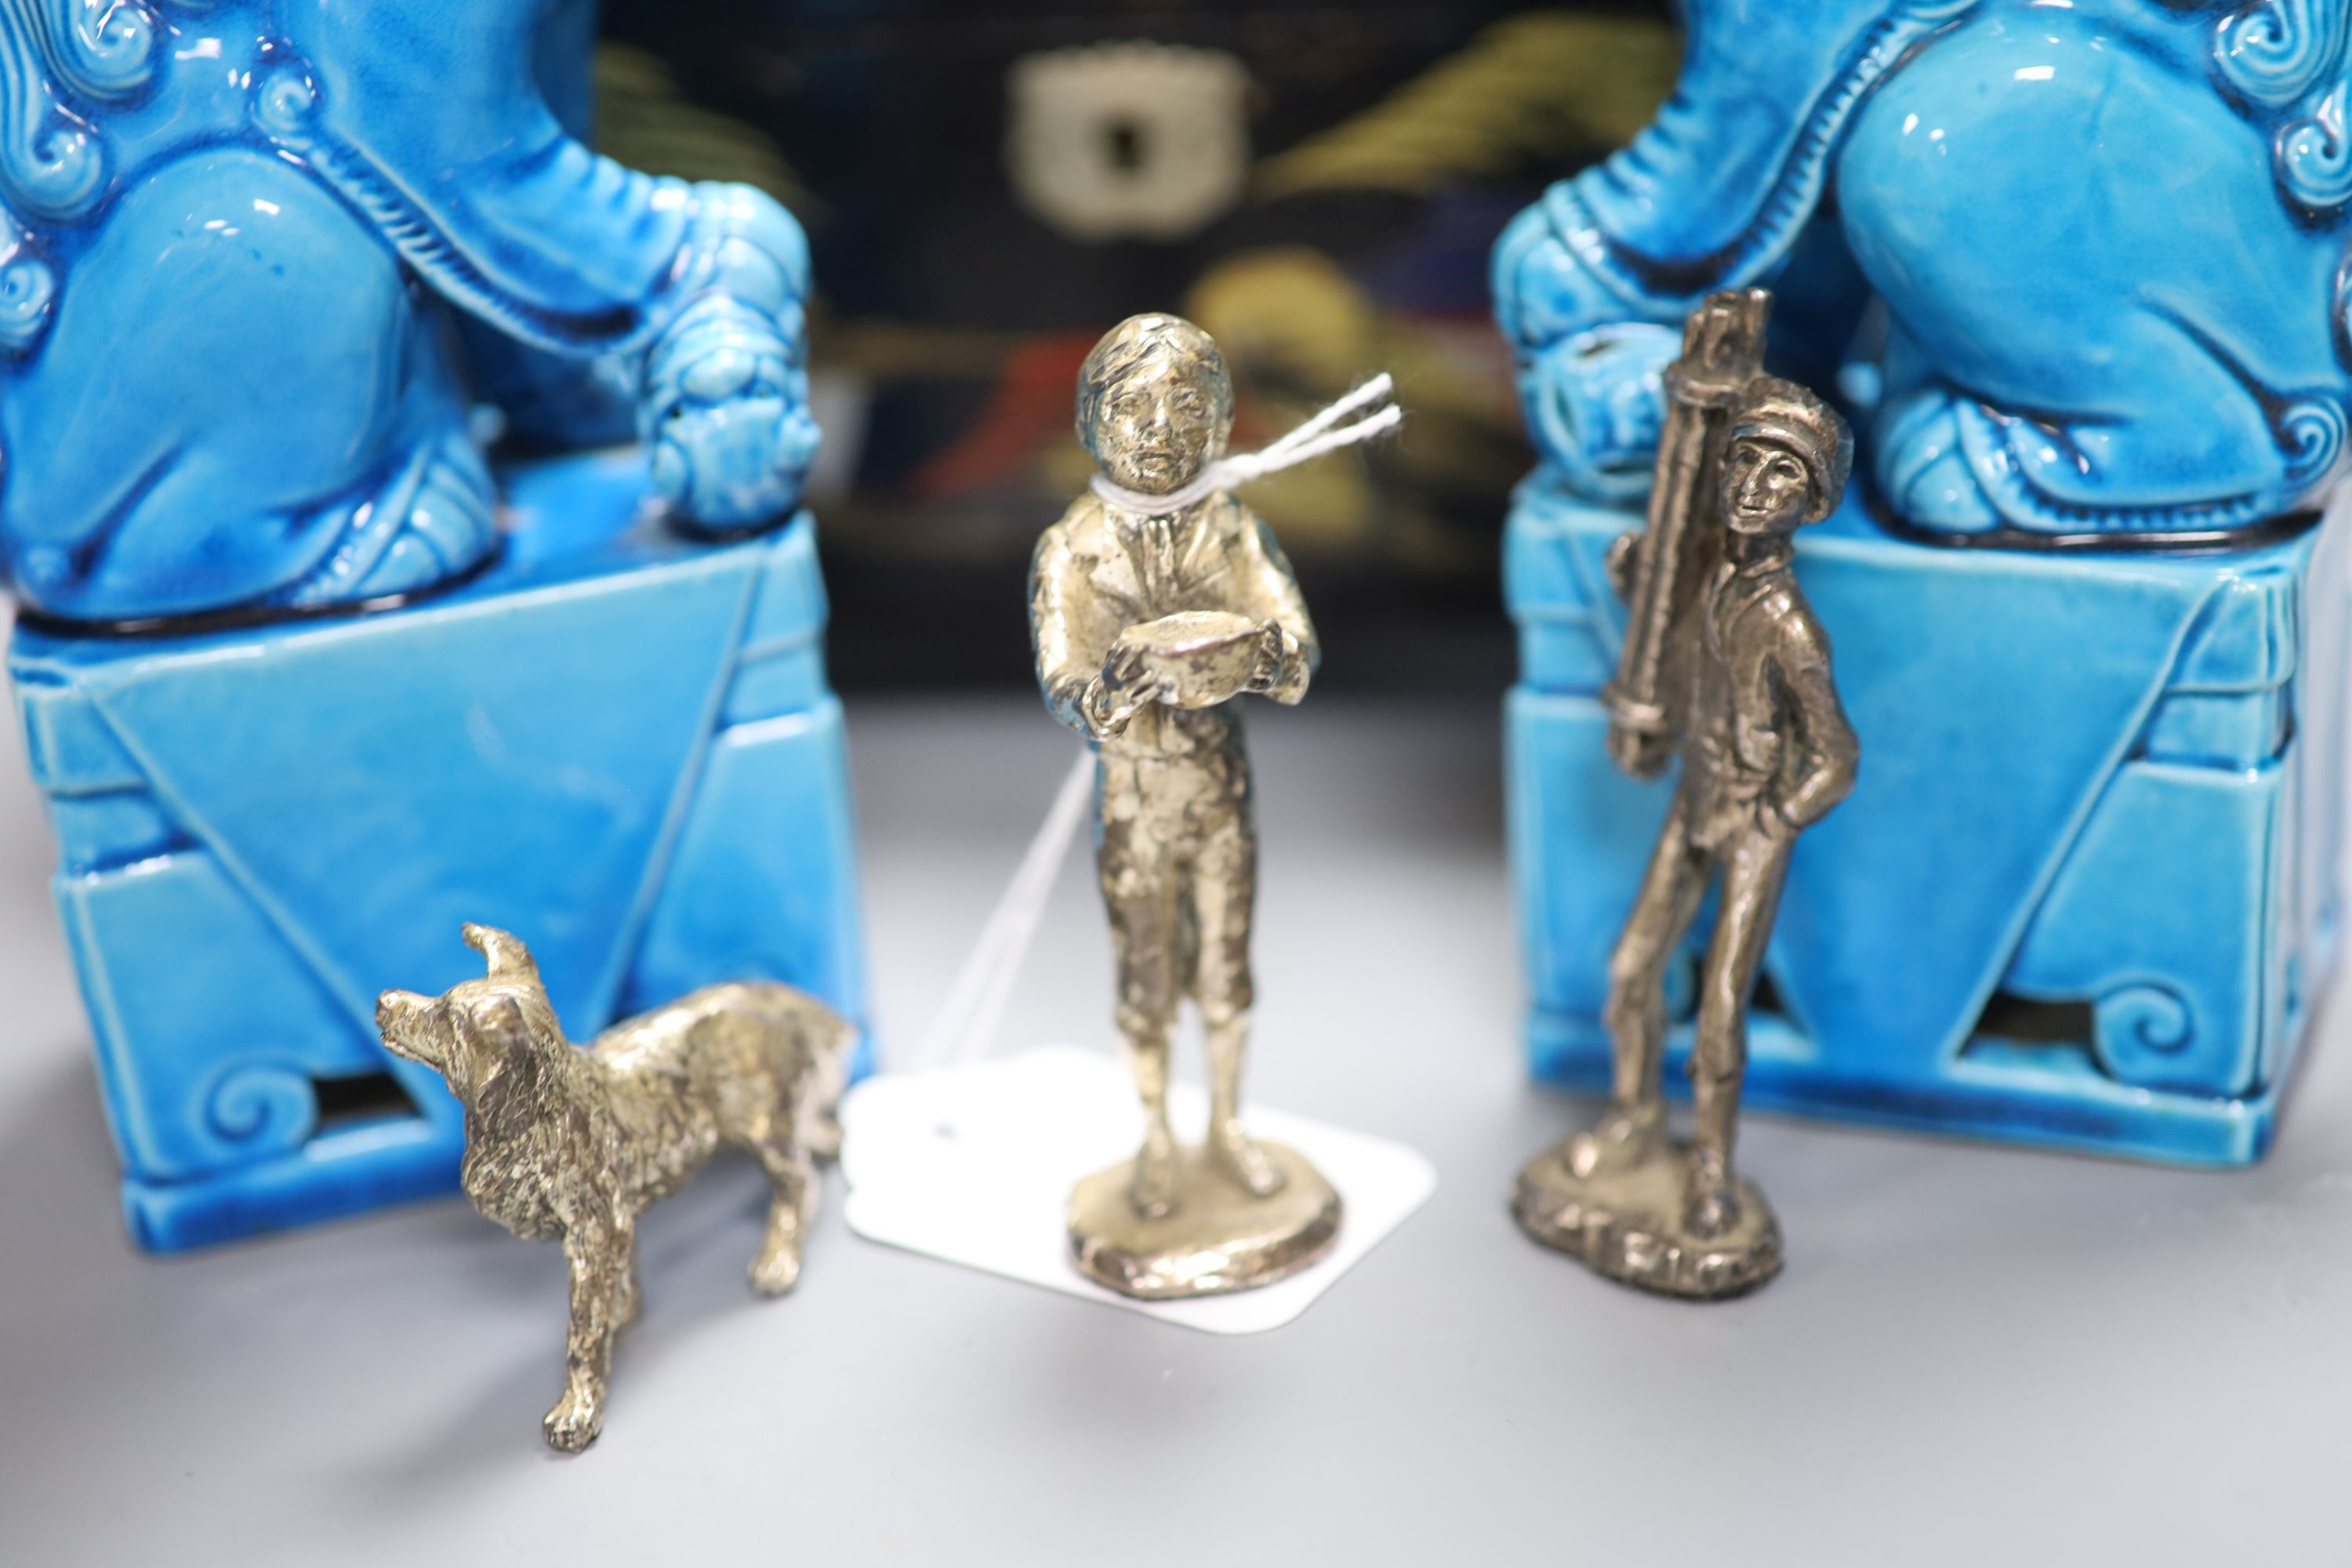 A pair of Chinese turquoise-glazed lion dogs, a lacquered jewellery box and three plated miniature figures